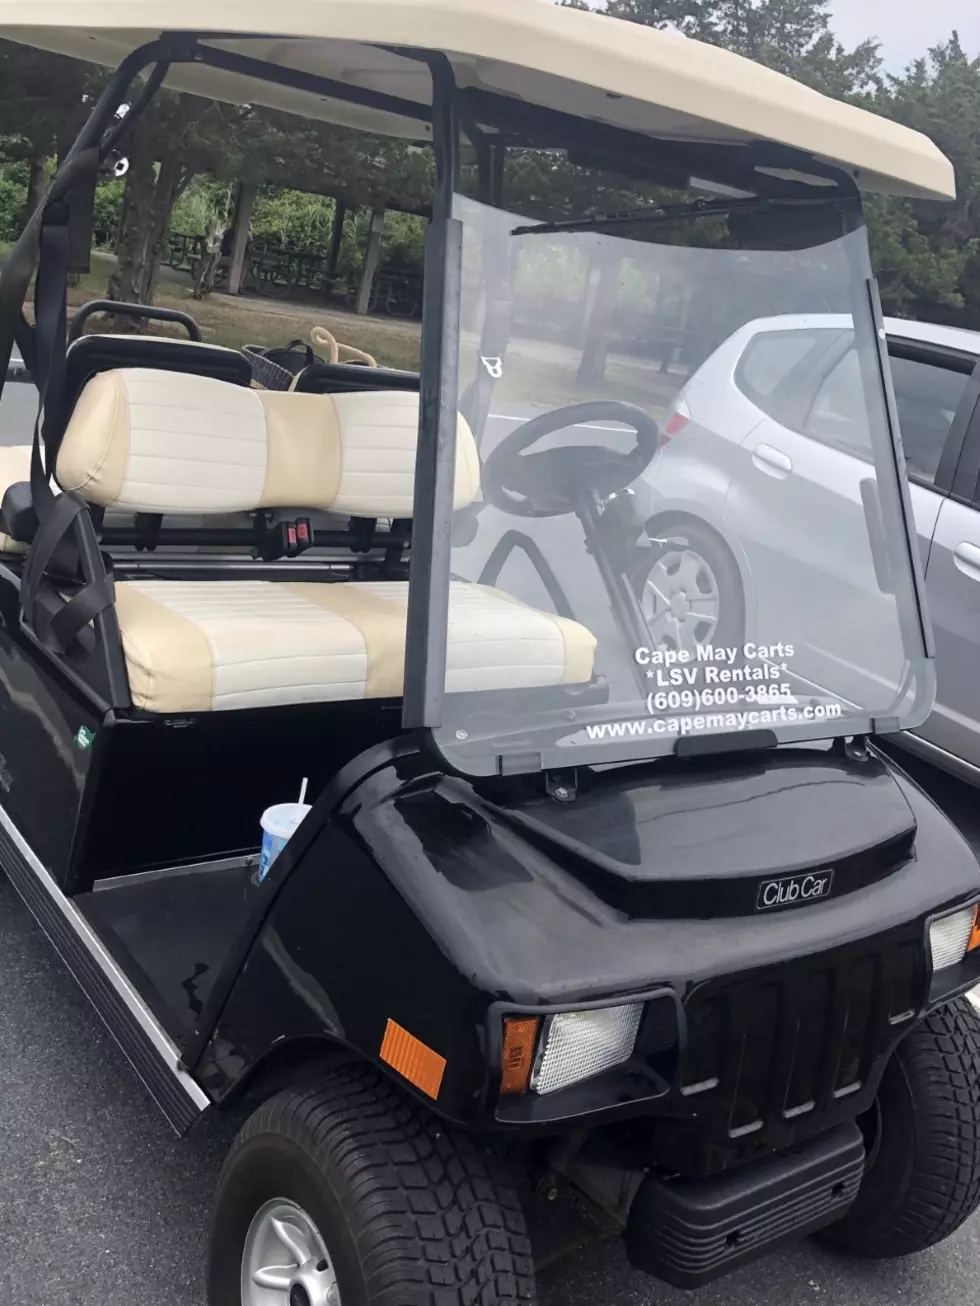 Fabulous Idea, Rent a Golf Cart and Check Out the Island in NJ